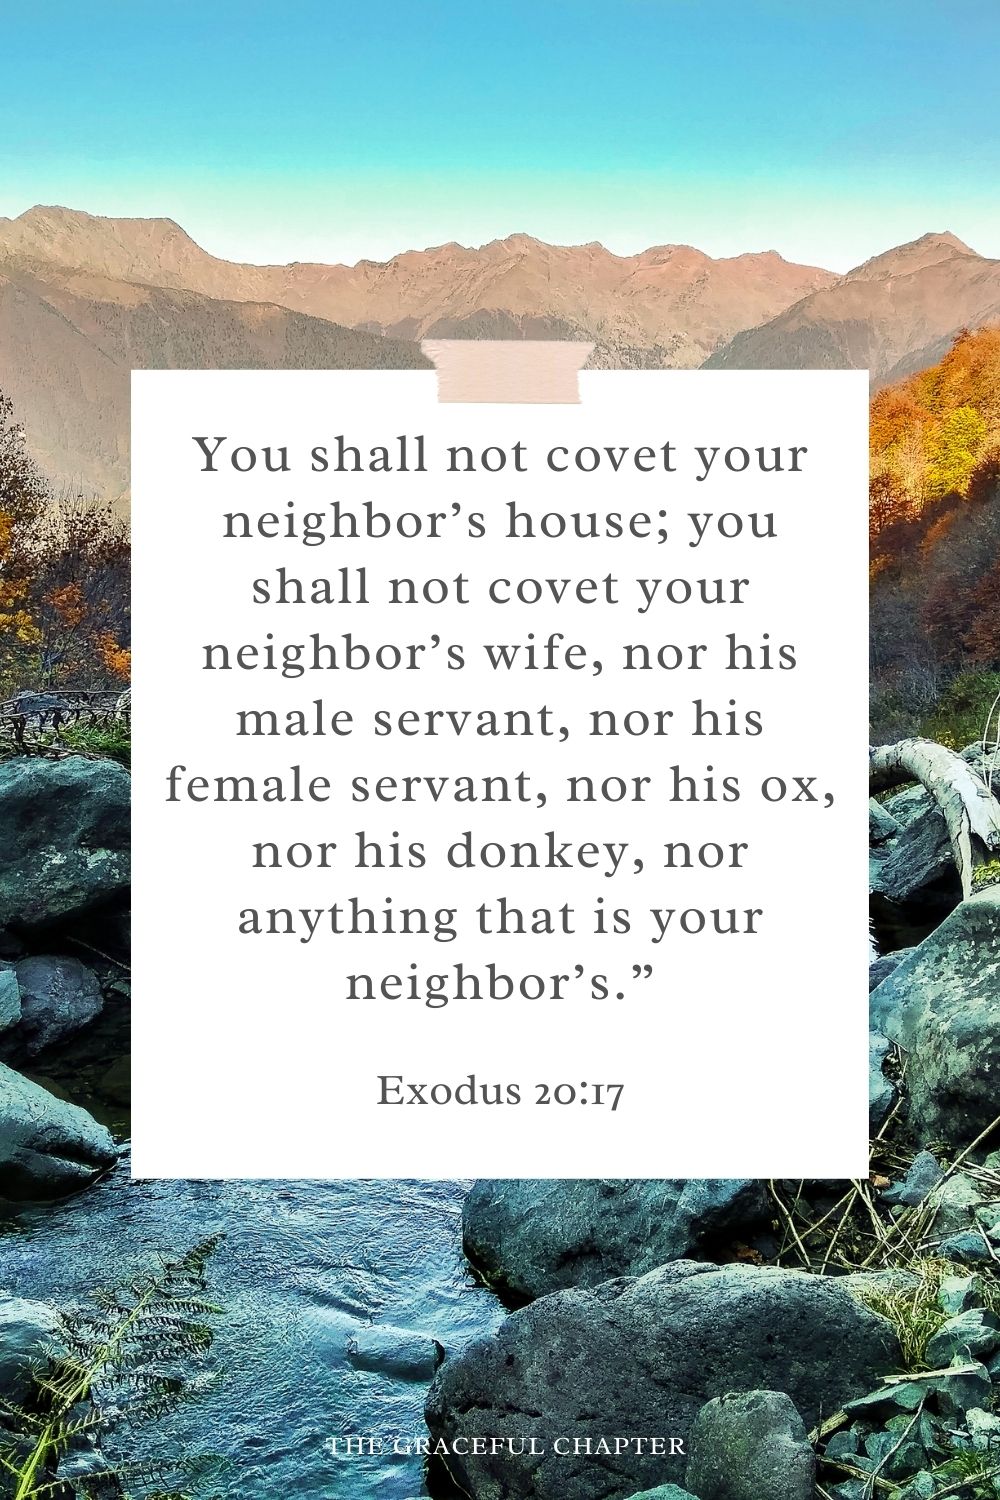 You shall not covet your neighbor’s house; you shall not covet your neighbor’s wife, nor his male servant, nor his female servant, nor his ox, nor his donkey, nor anything that is your neighbor’s.” Exodus 20:17